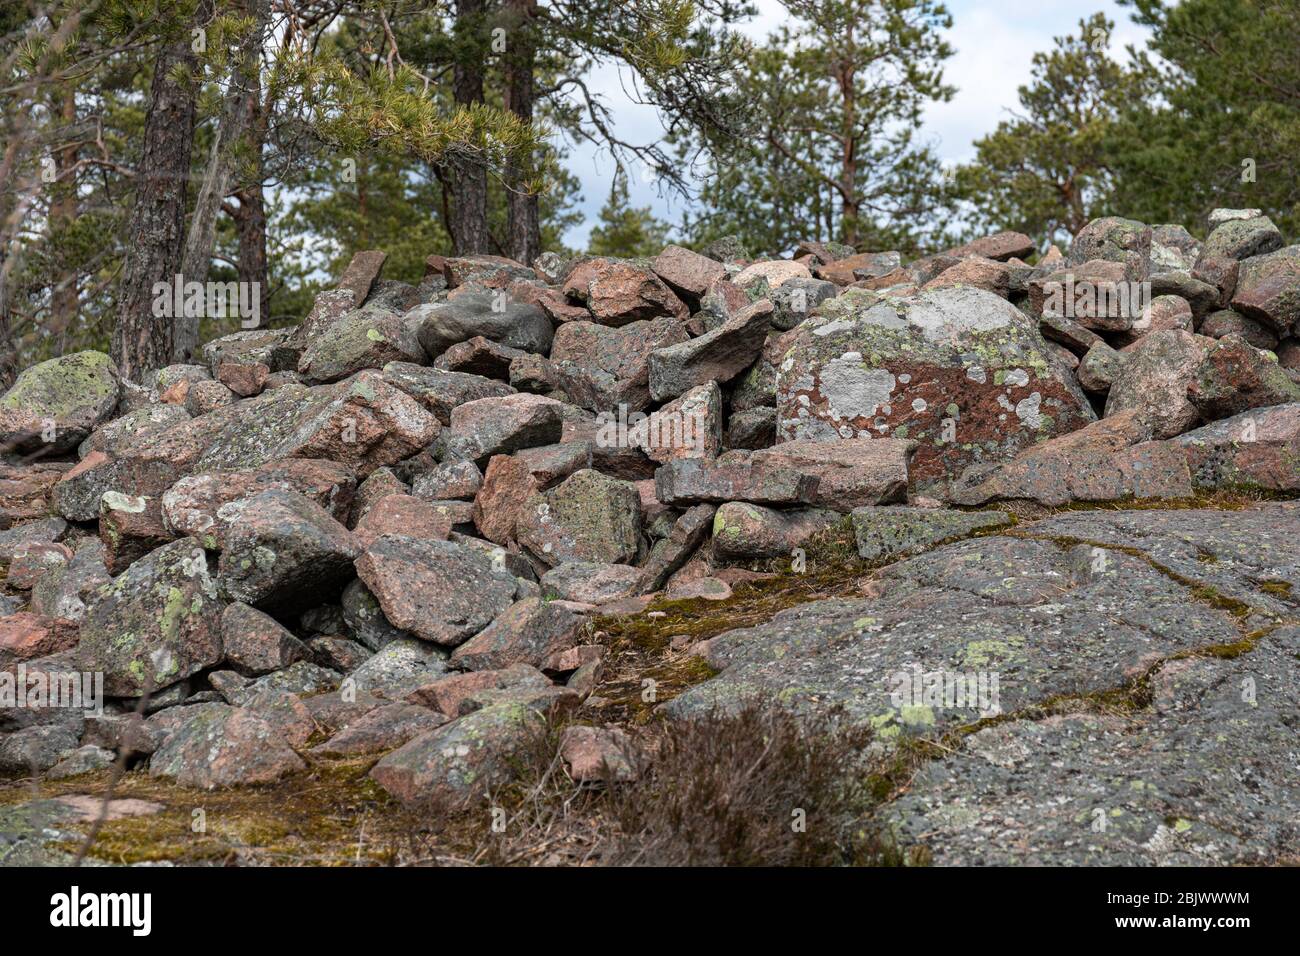 Hiidenkiuas, a pre-historic burial cairn or bronze age tumulus, in Espoo, Finland Stock Photo